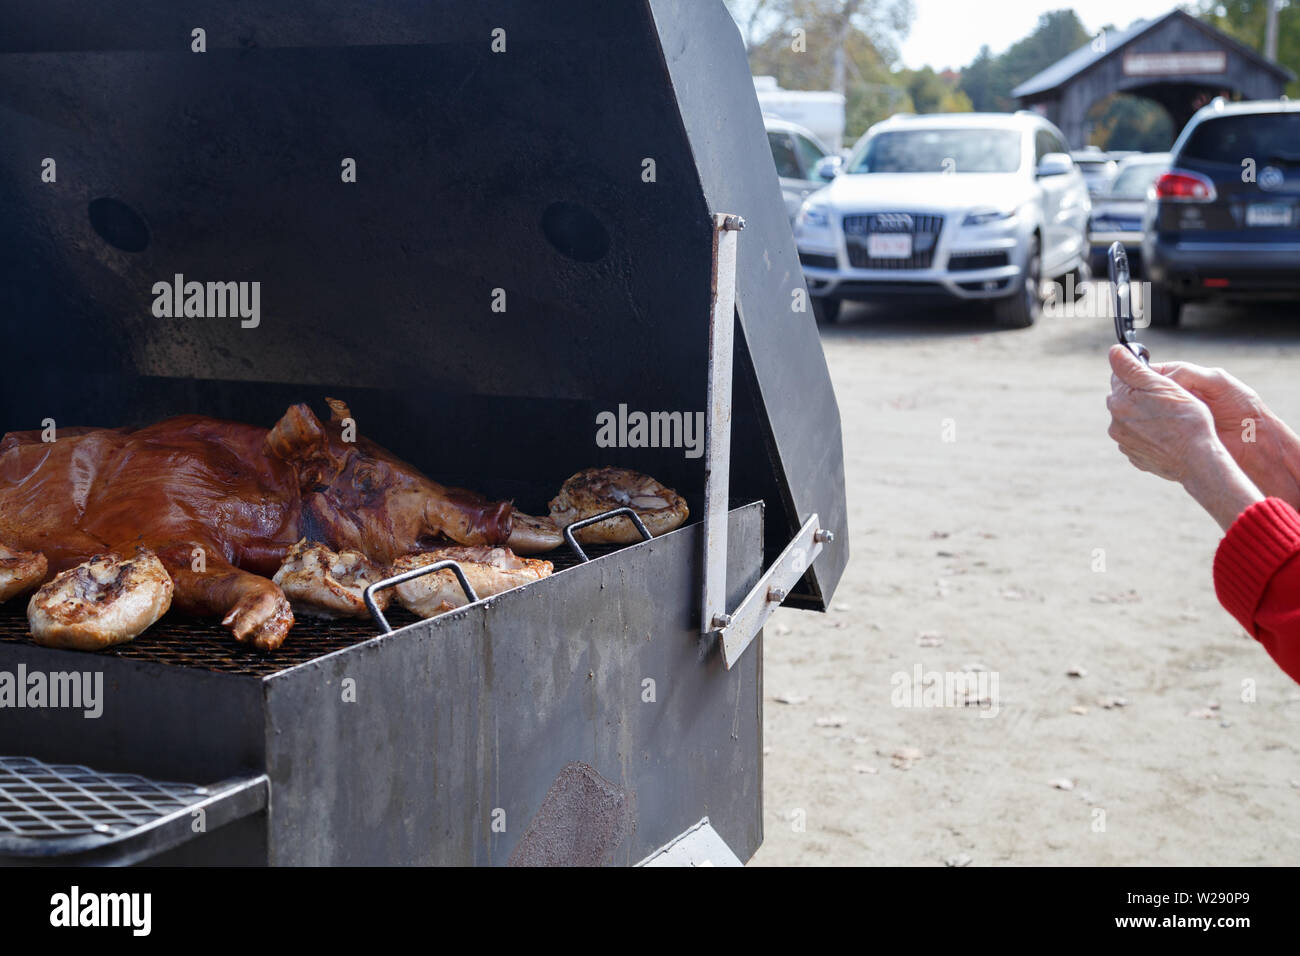 A visitor takes a photo of a pig barbecue held at a parking lot of the Vermont country store in Town of Rockingham, Vermont, USA. Stock Photo